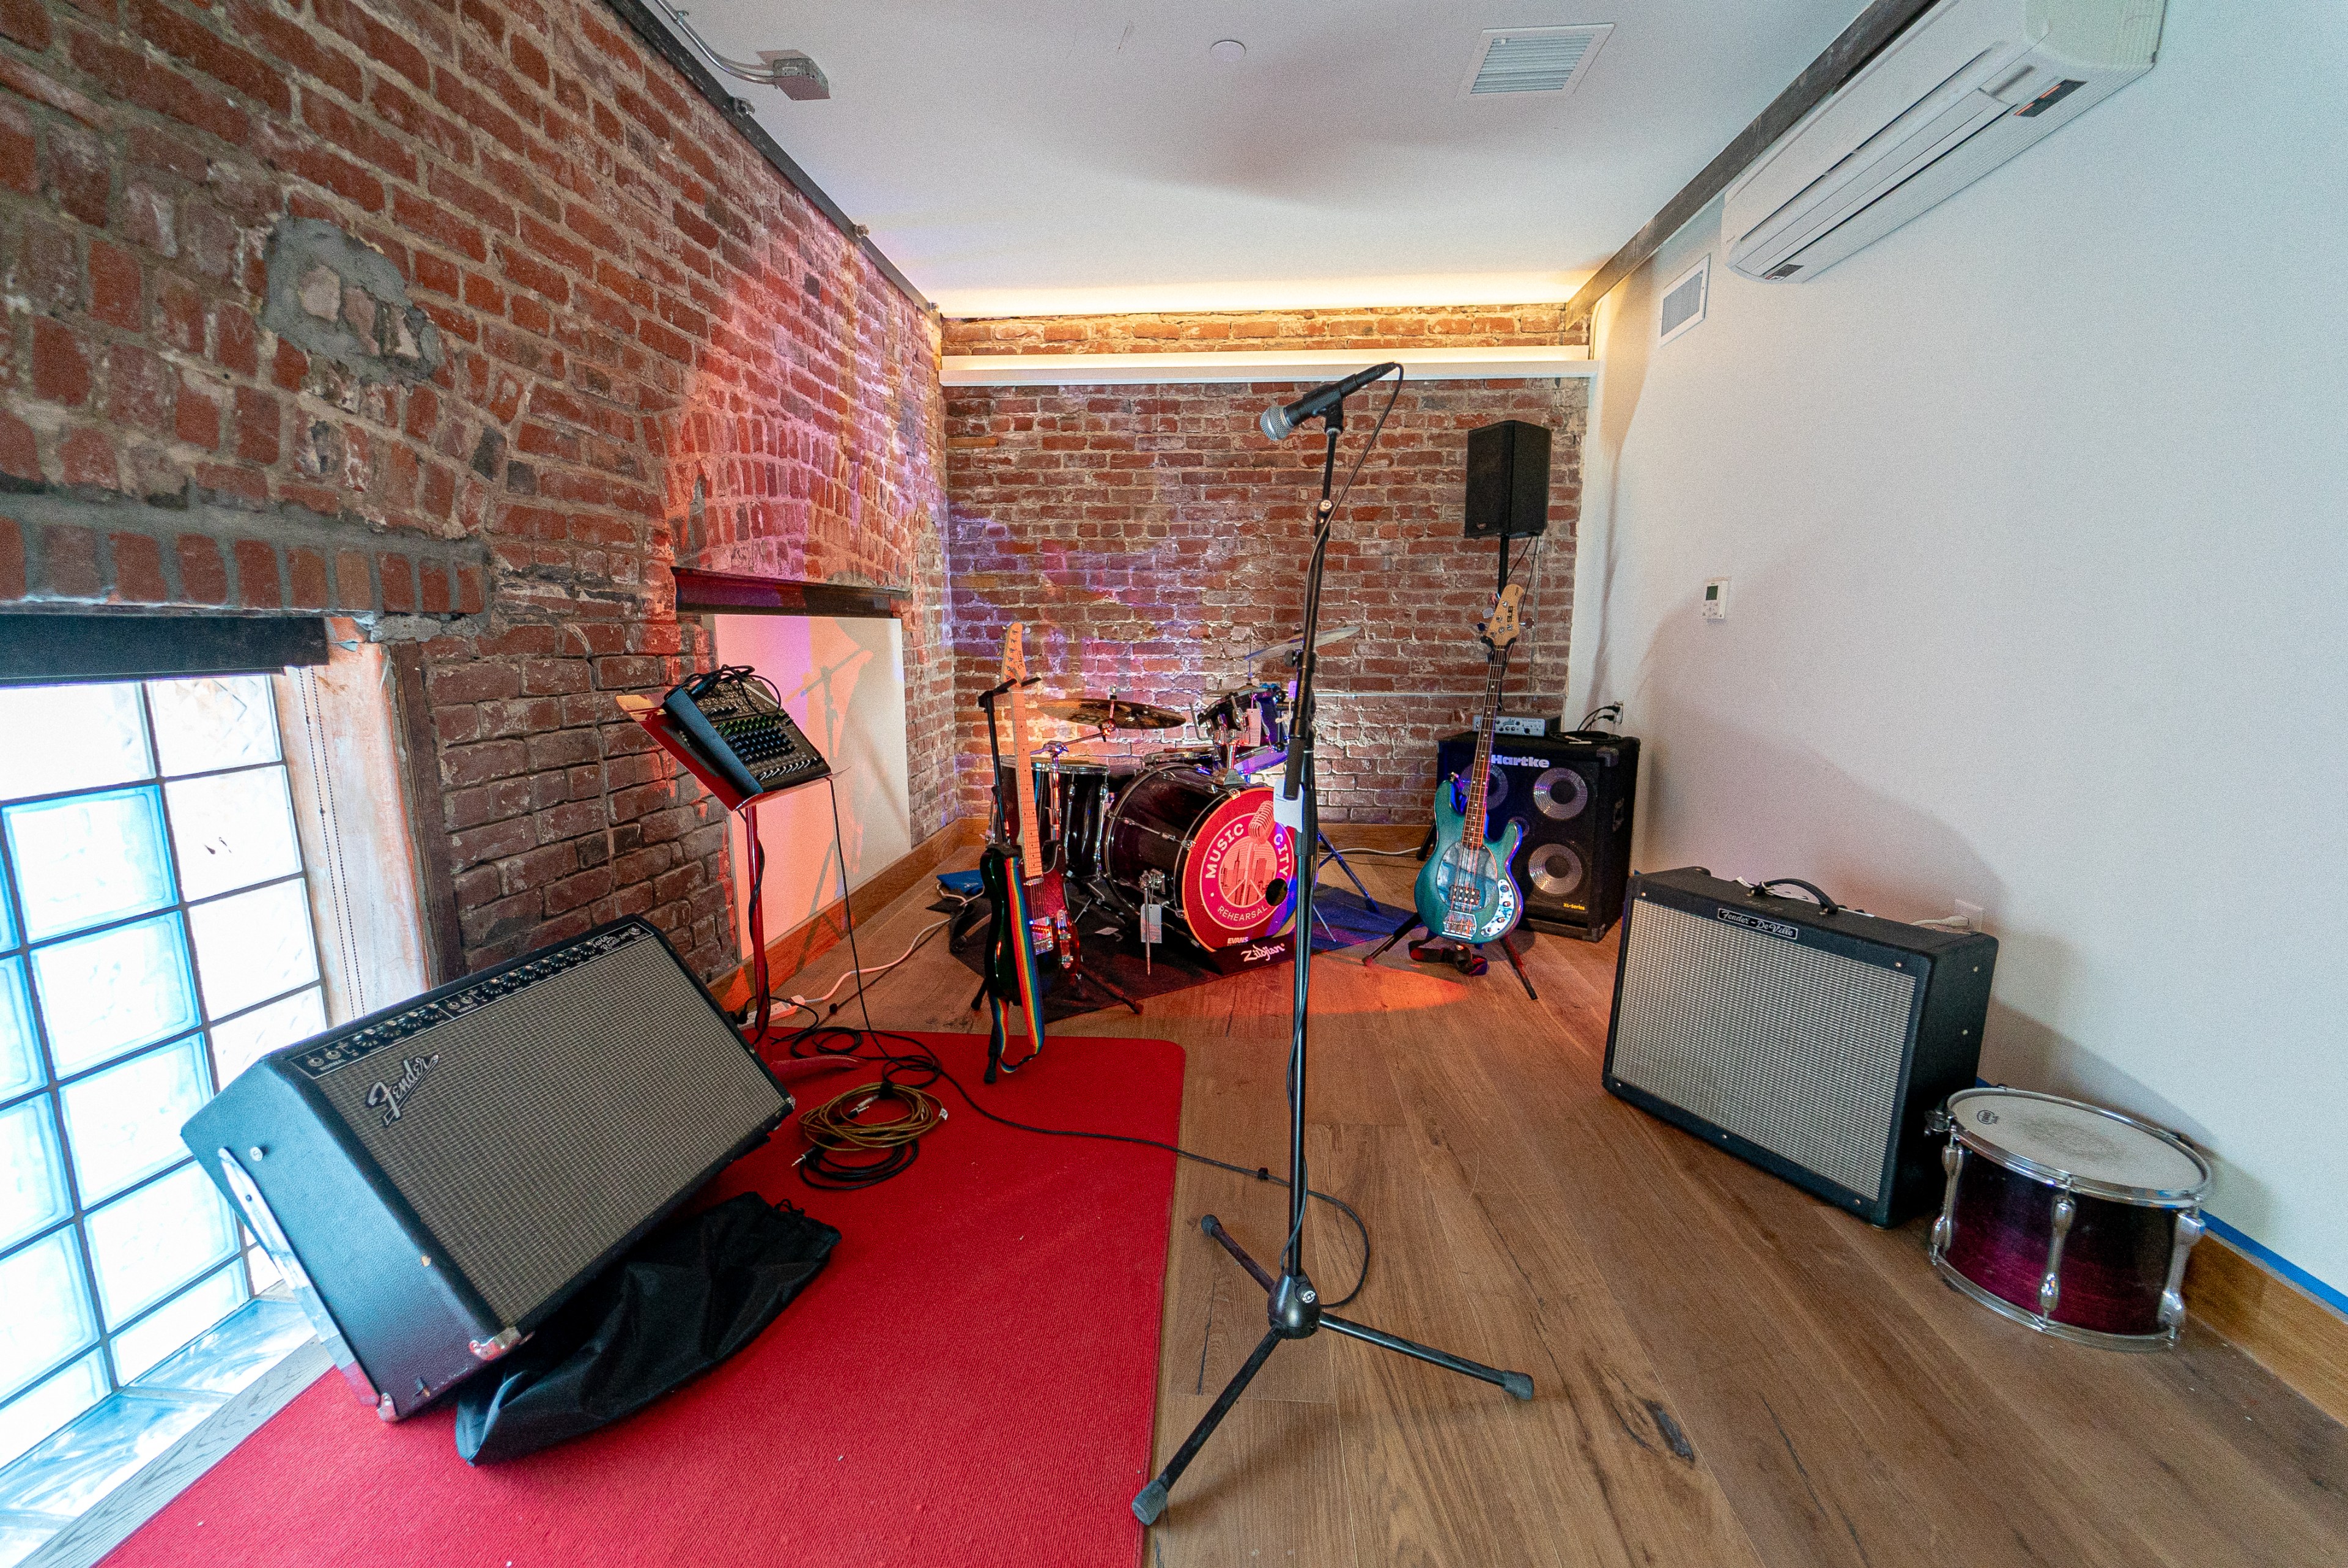 Amps and guitars stand in a room with brick walls and glass windows. 